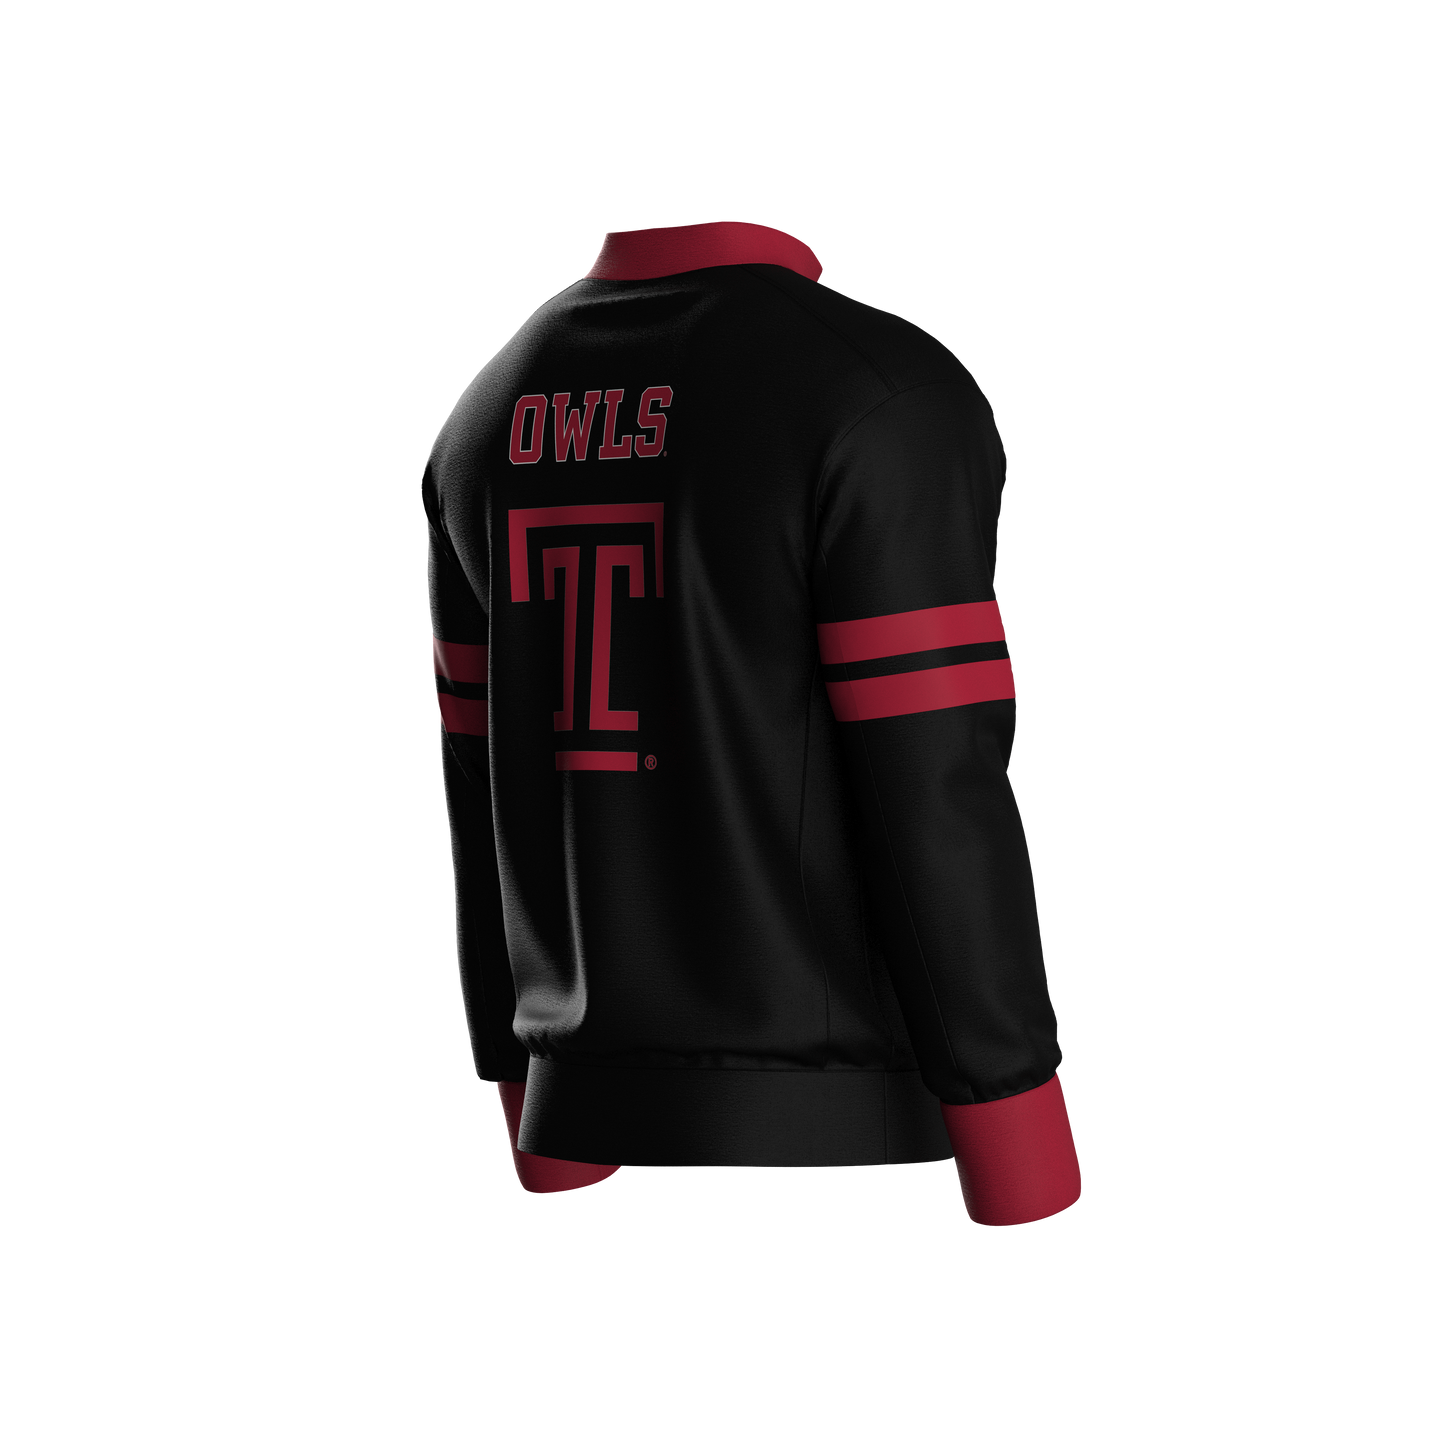 Temple University Away Pullover (adult)